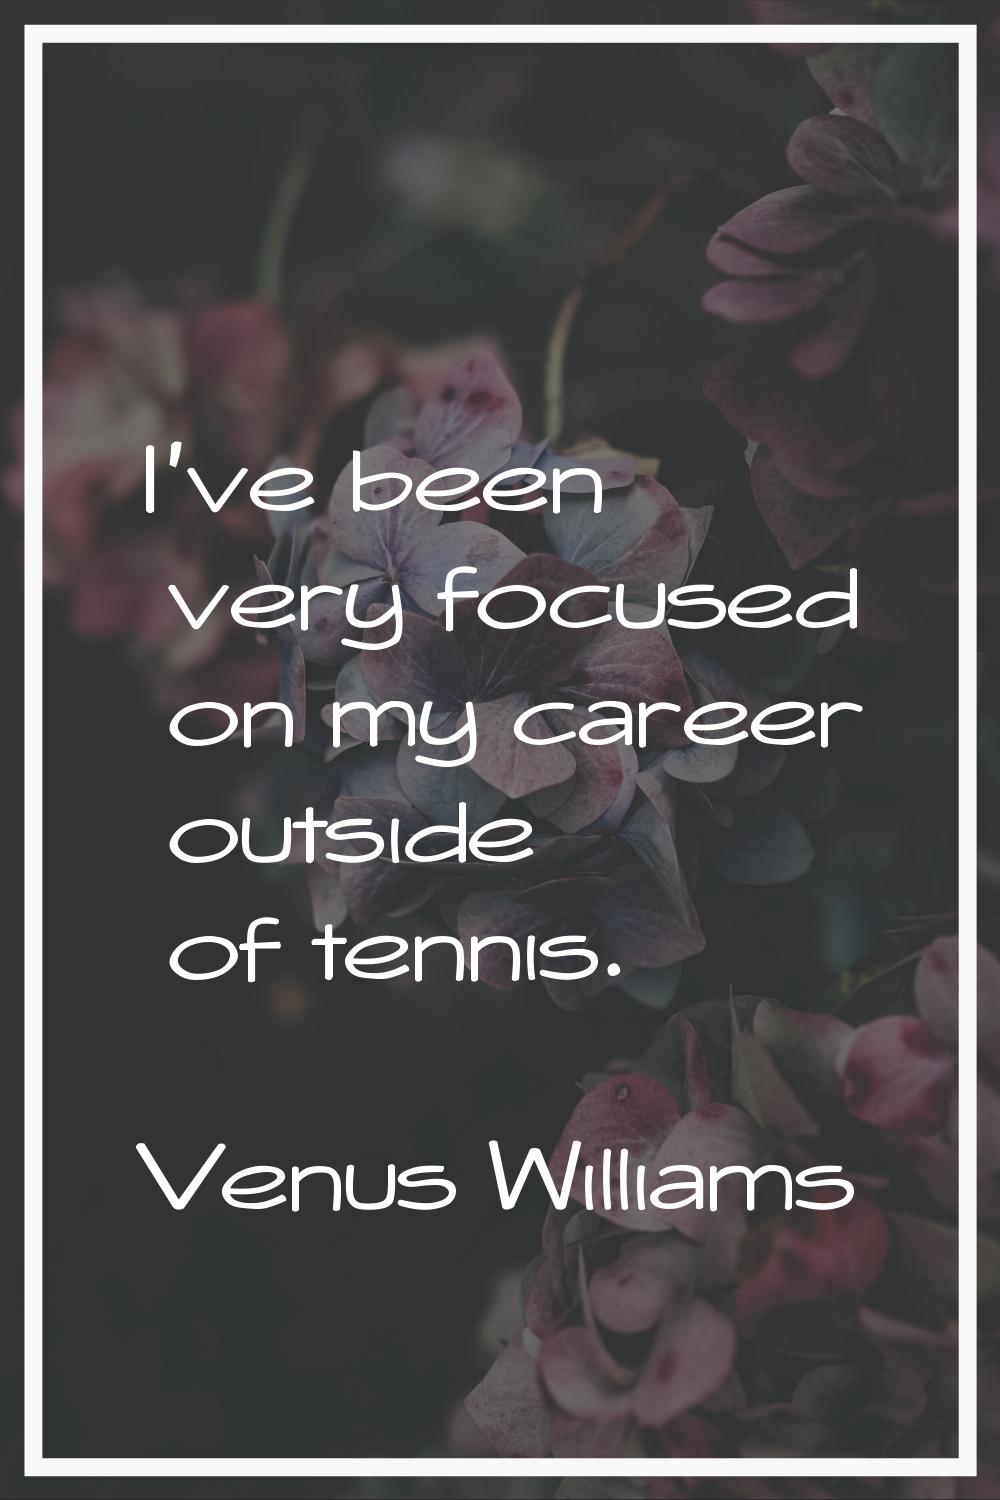 I've been very focused on my career outside of tennis.